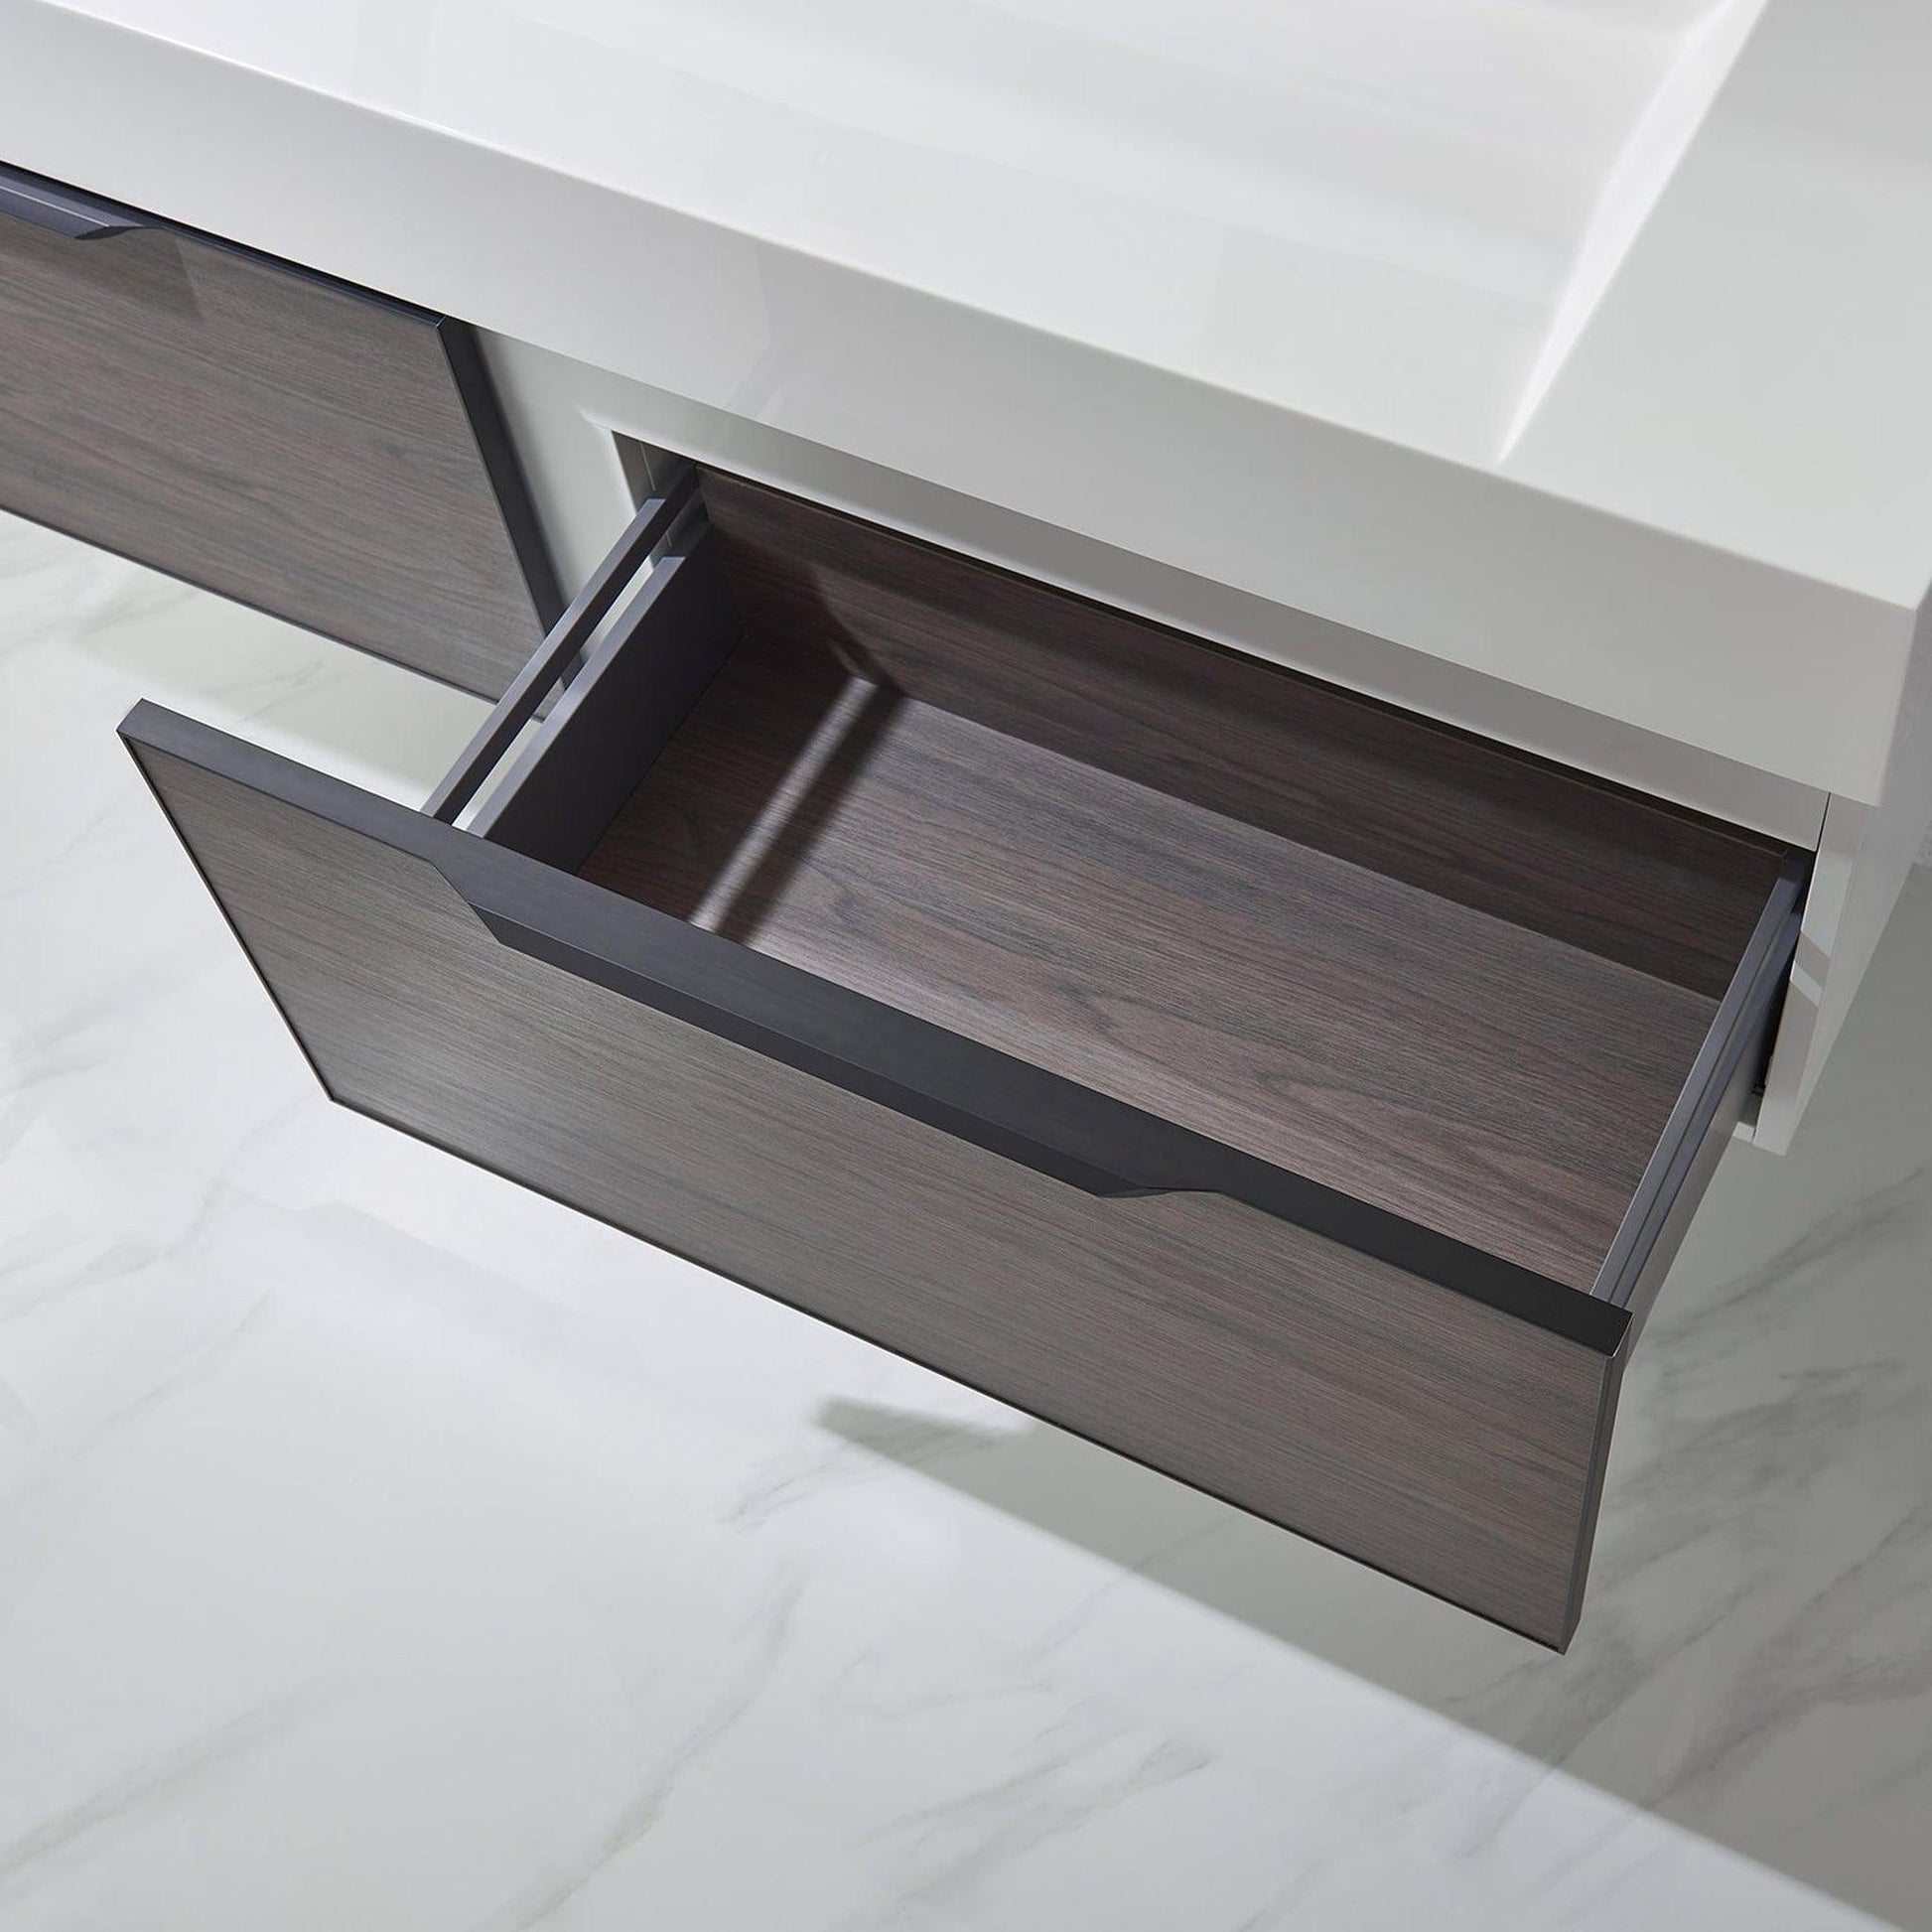 Vinnova Vegadeo 60" Double Sink Bath Vanity In Suleiman Oak Finish With White One-Piece Composite Stone Sink Top And Mirror